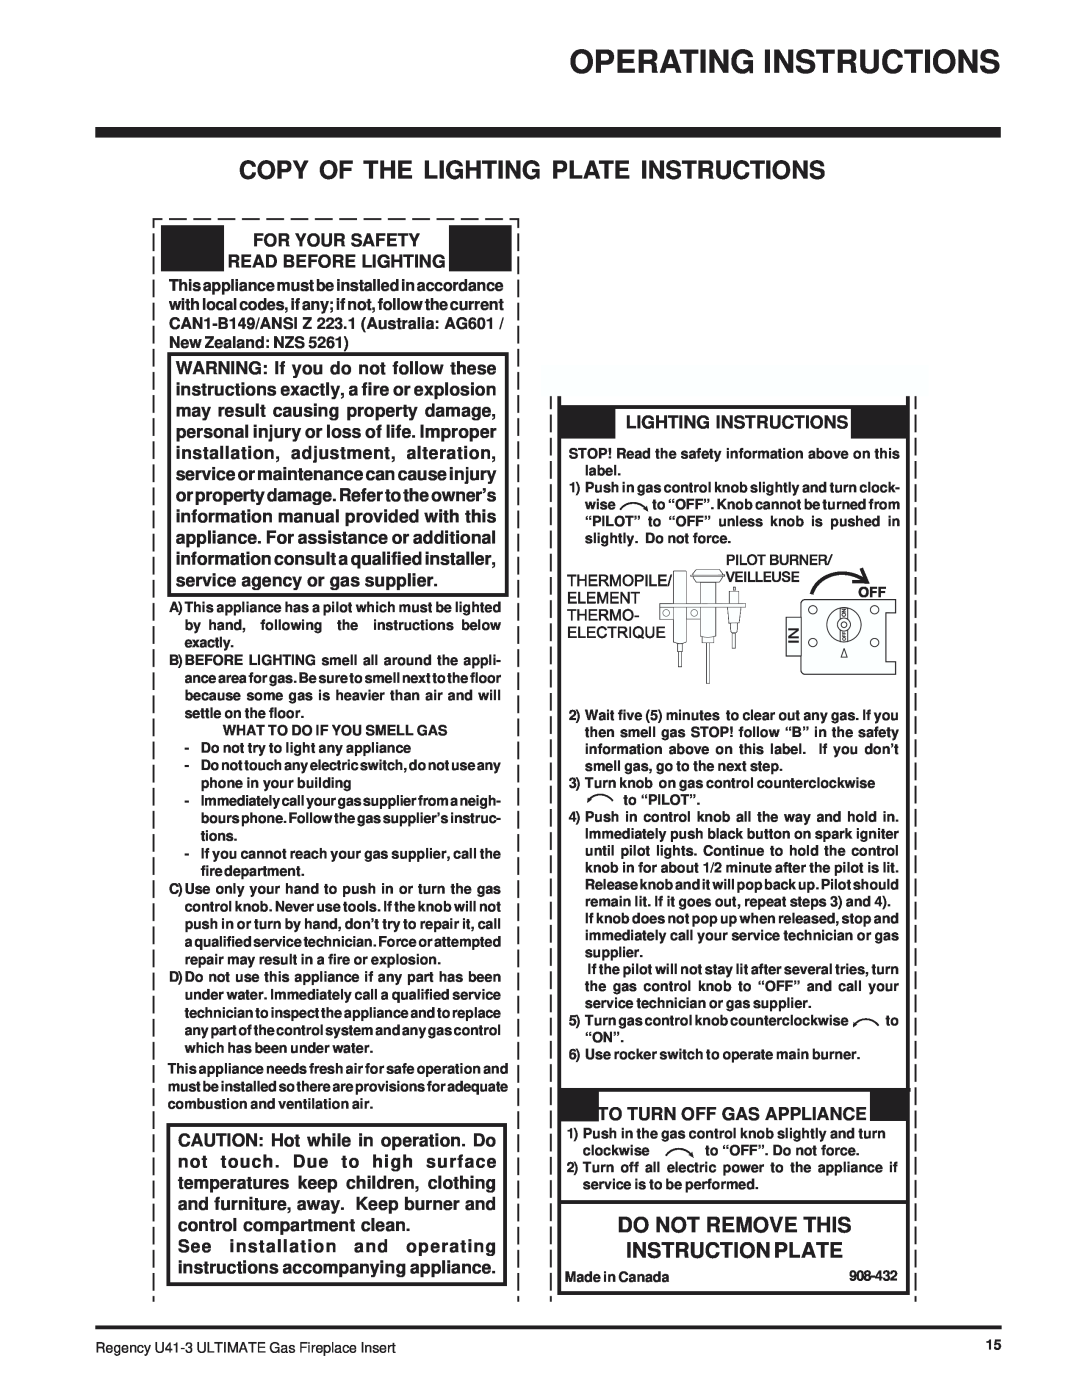 Regency U41-LP3 Copy Of The Lighting Plate Instructions, Do Not Remove This Instruction Plate, Lighting Instructions 